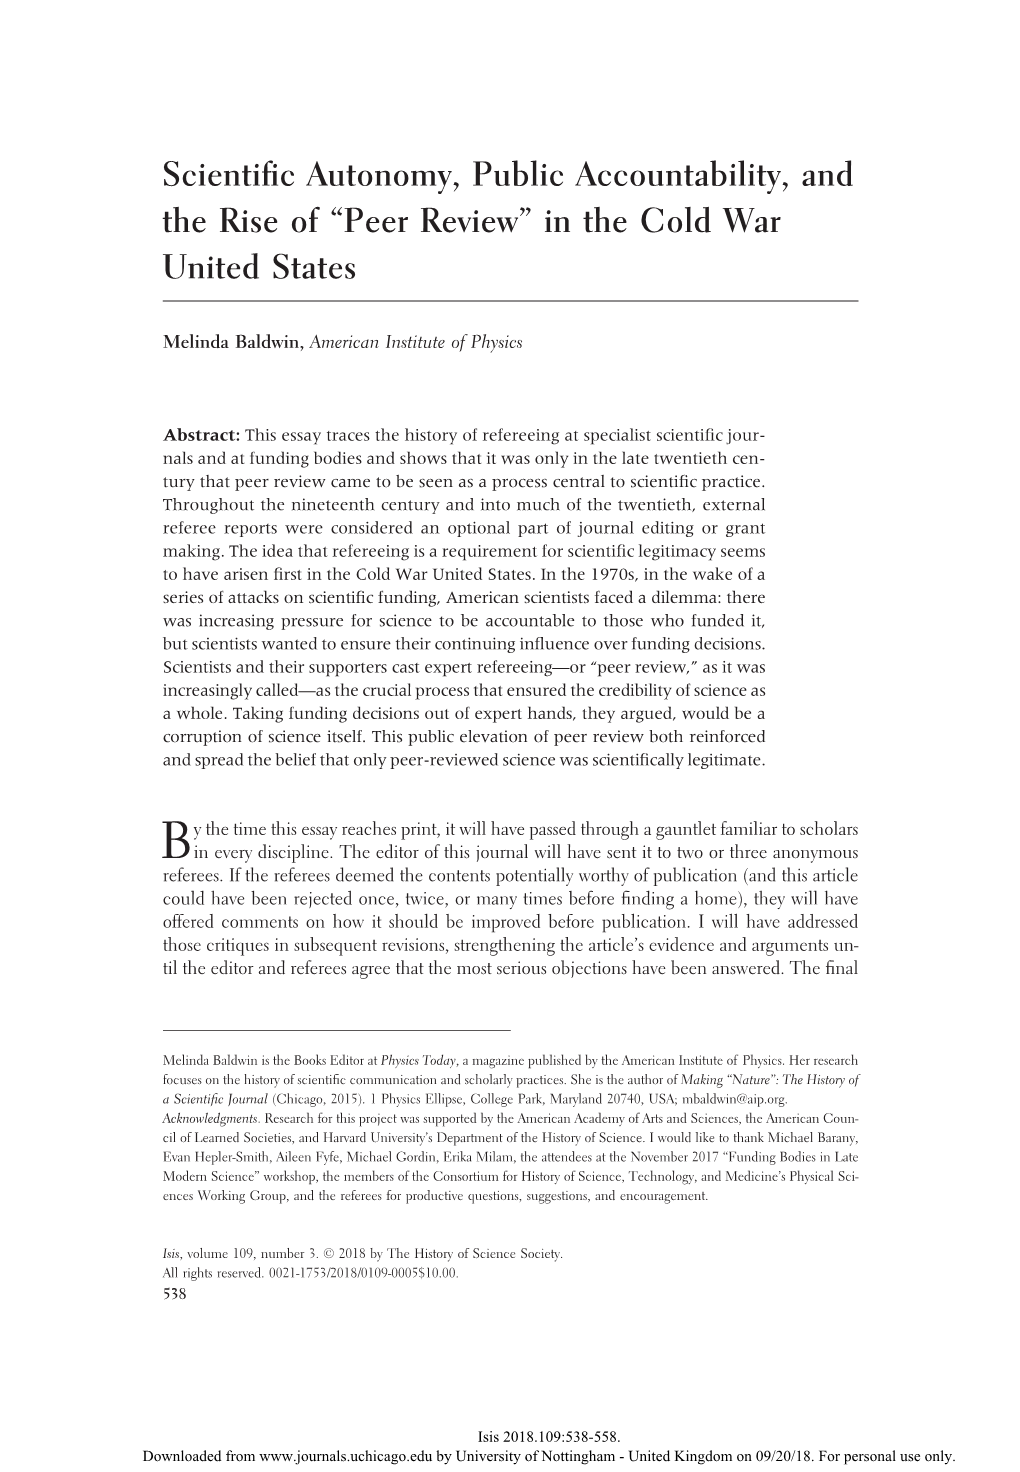 Scientific Autonomy, Public Accountability, and the Rise of “Peer Review” in the Cold War United States